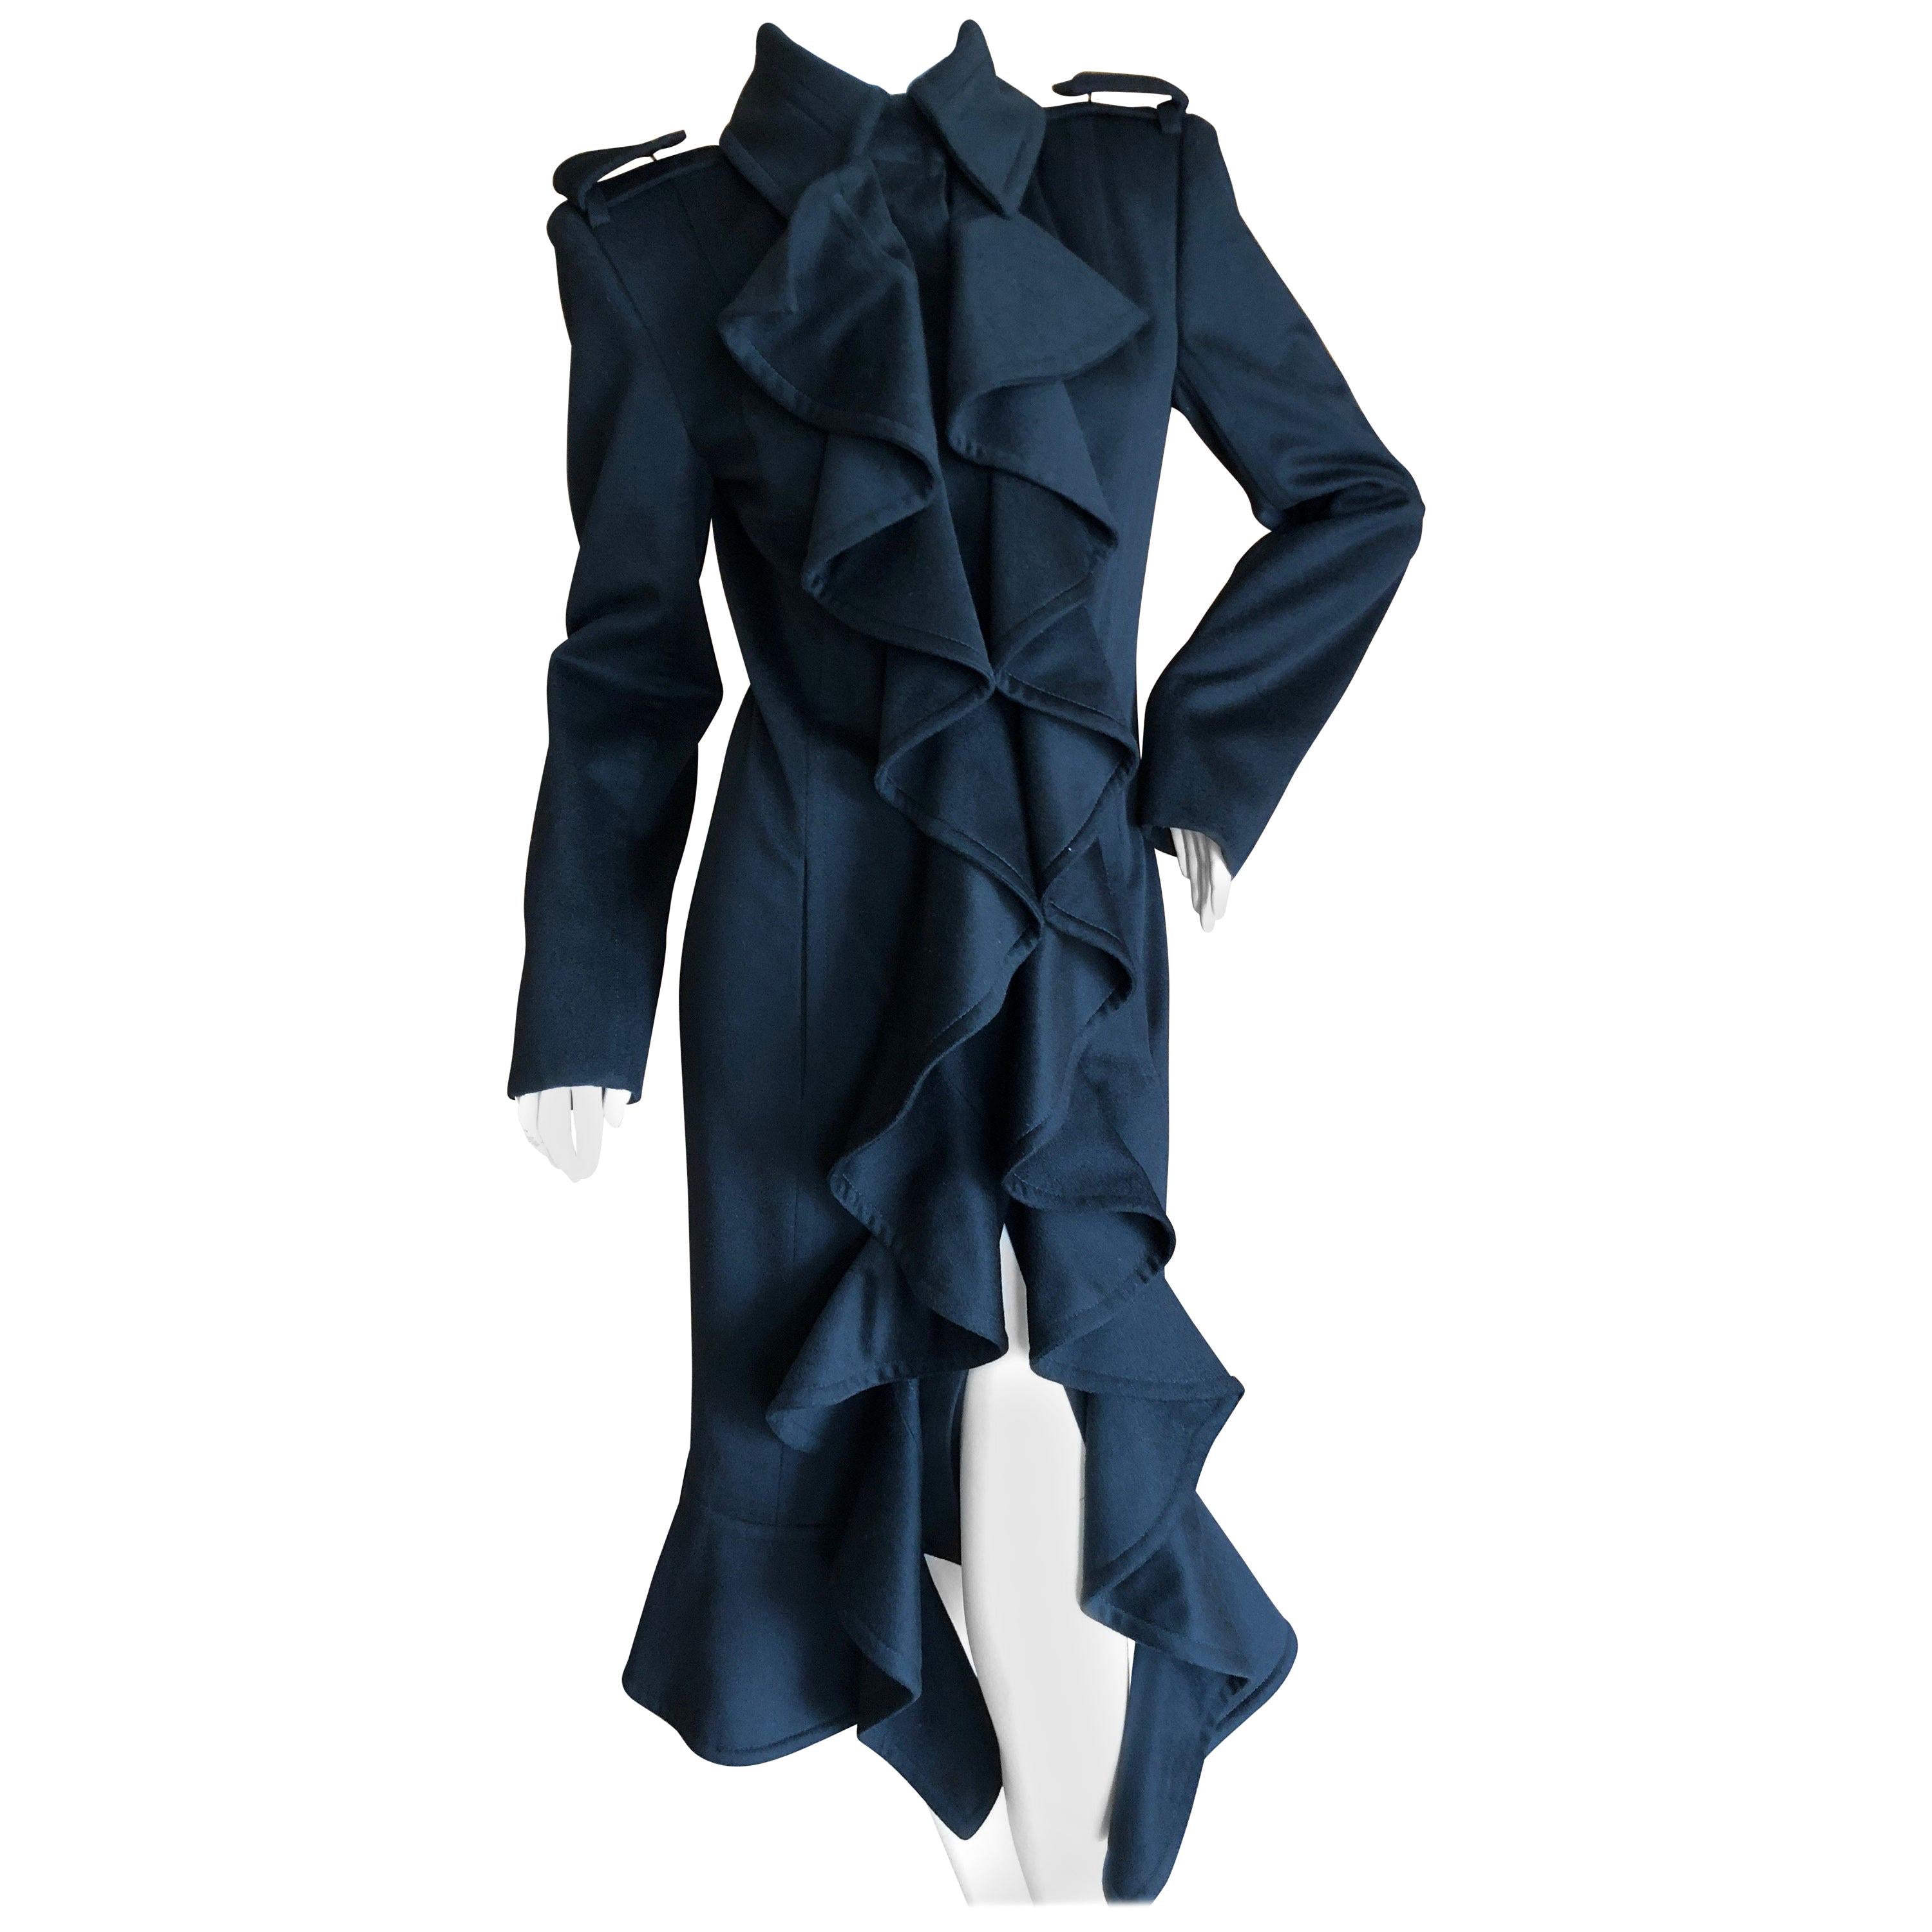 Yves Saint Laurent by Tom Ford Black Wool Ruffle Front Coat from Fall 2004 For Sale